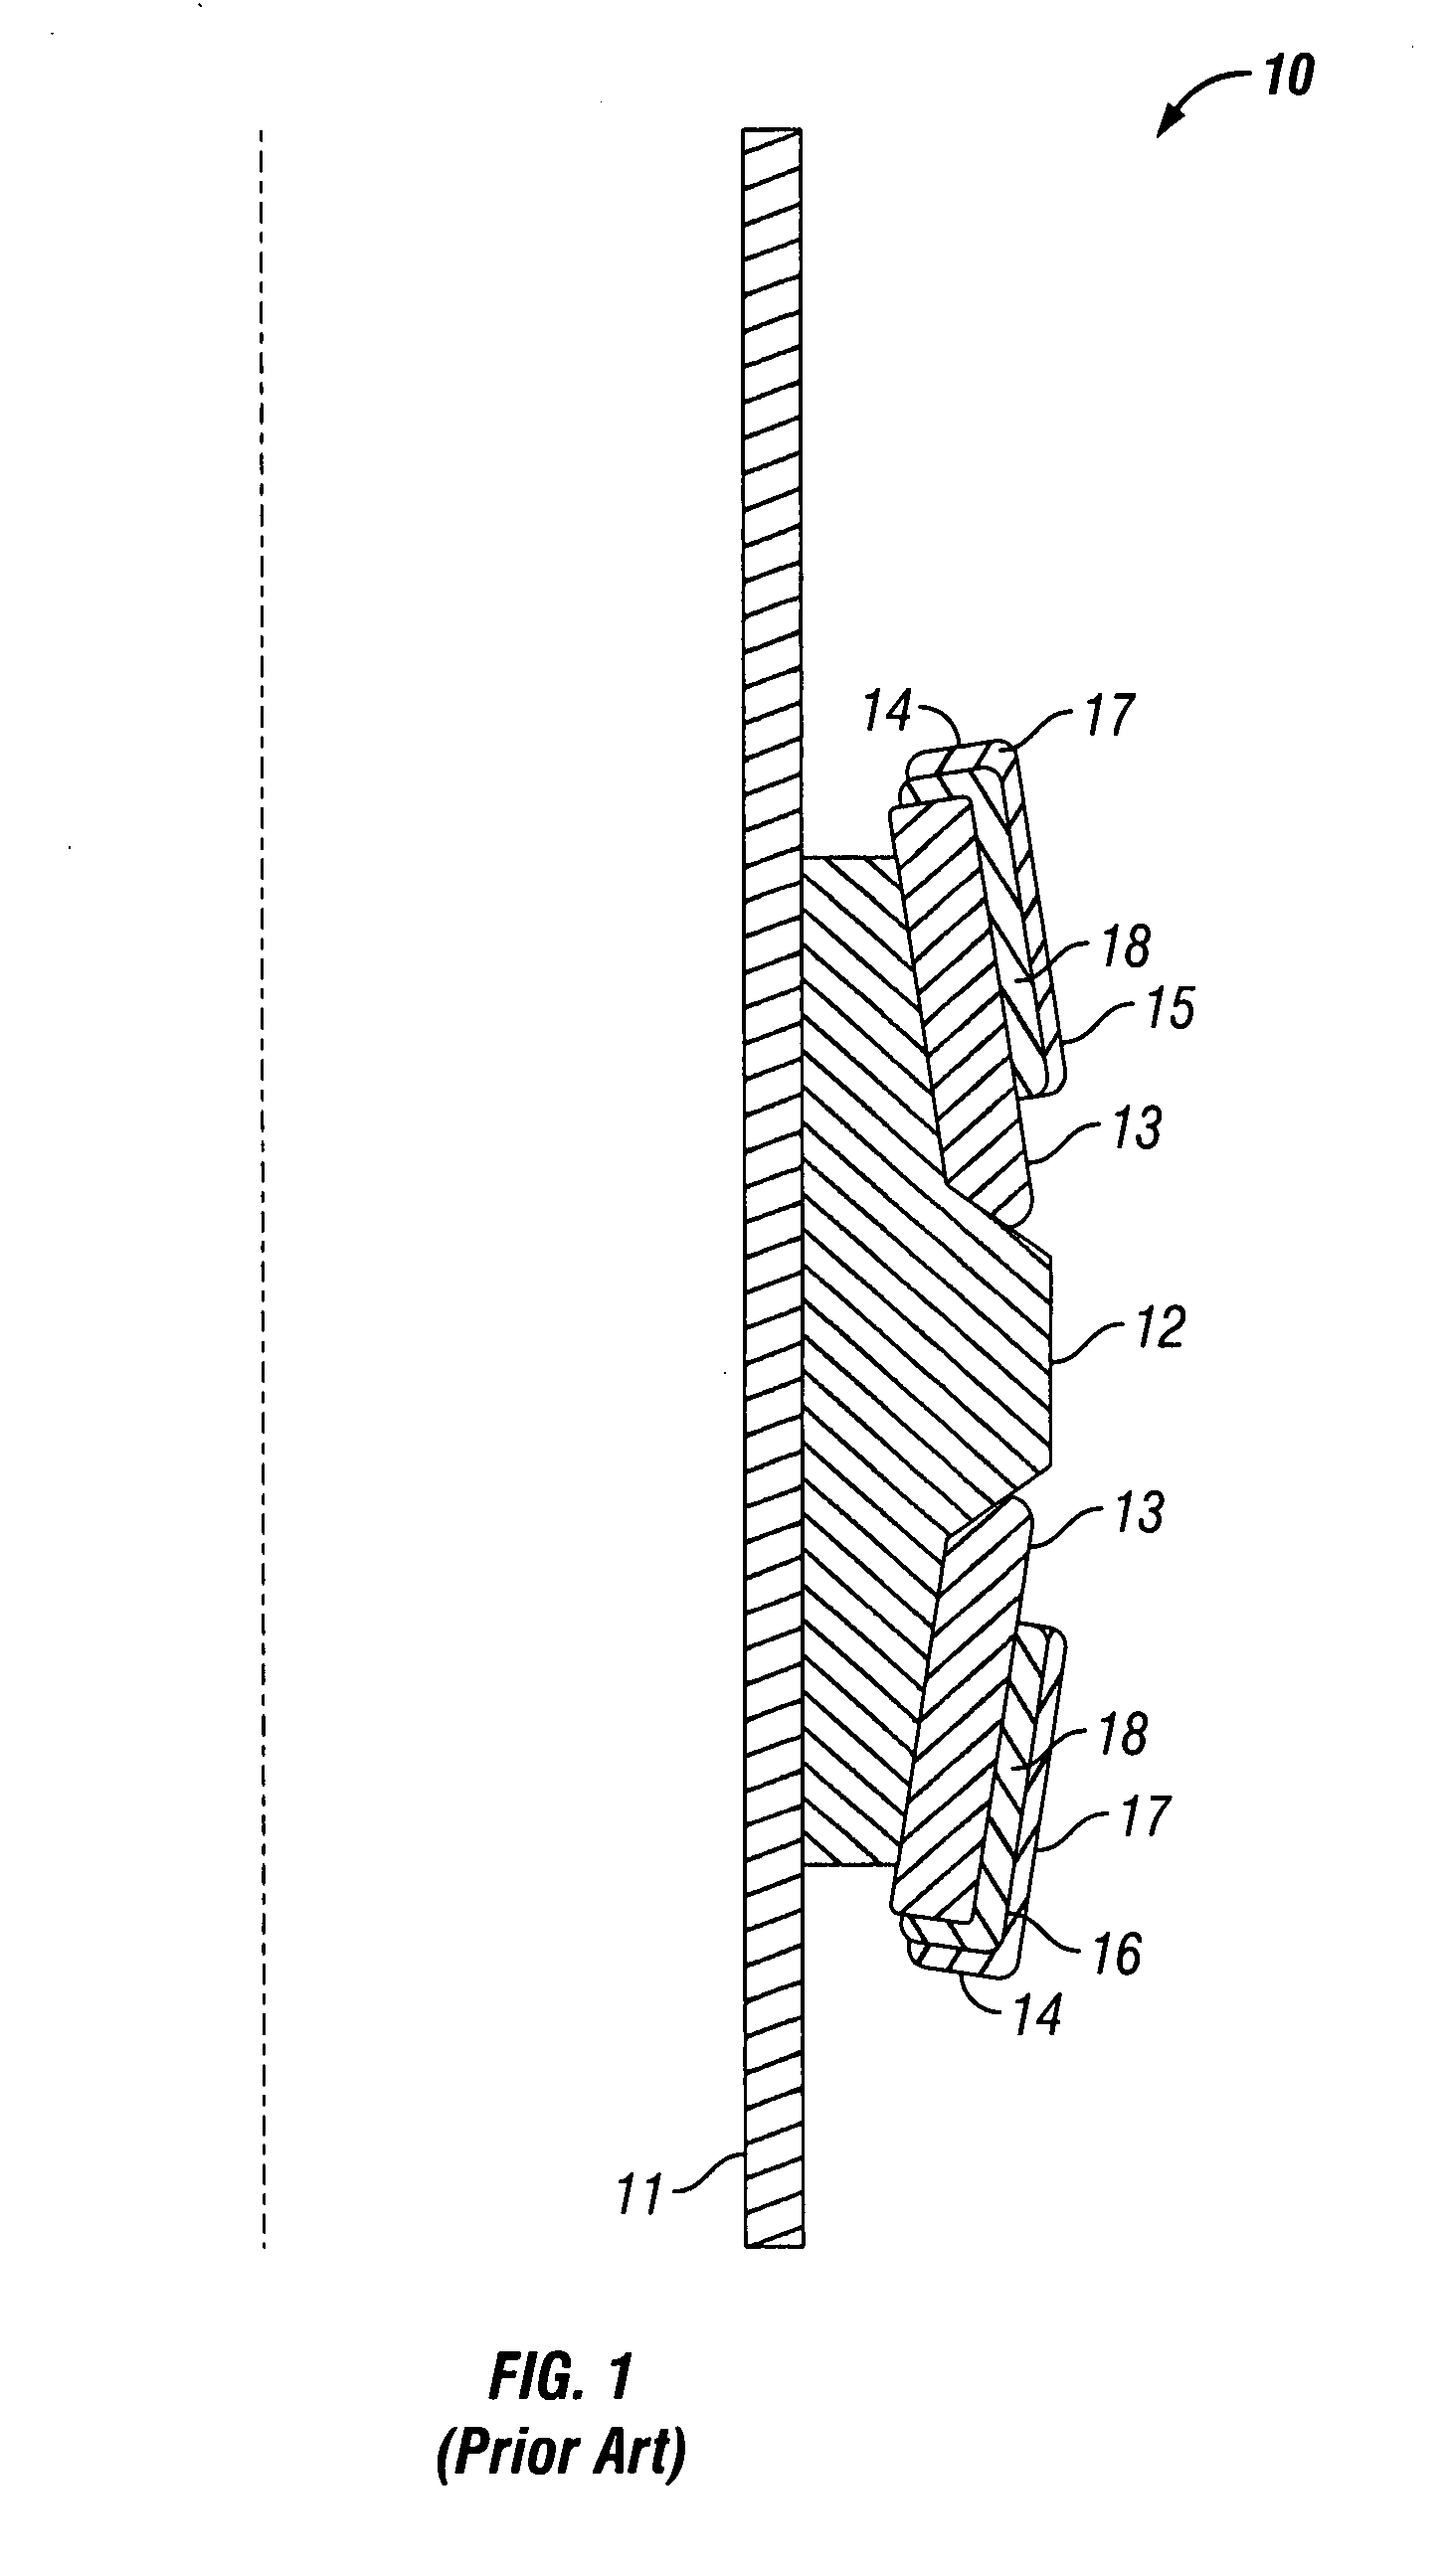 Non-backed-up packing element system